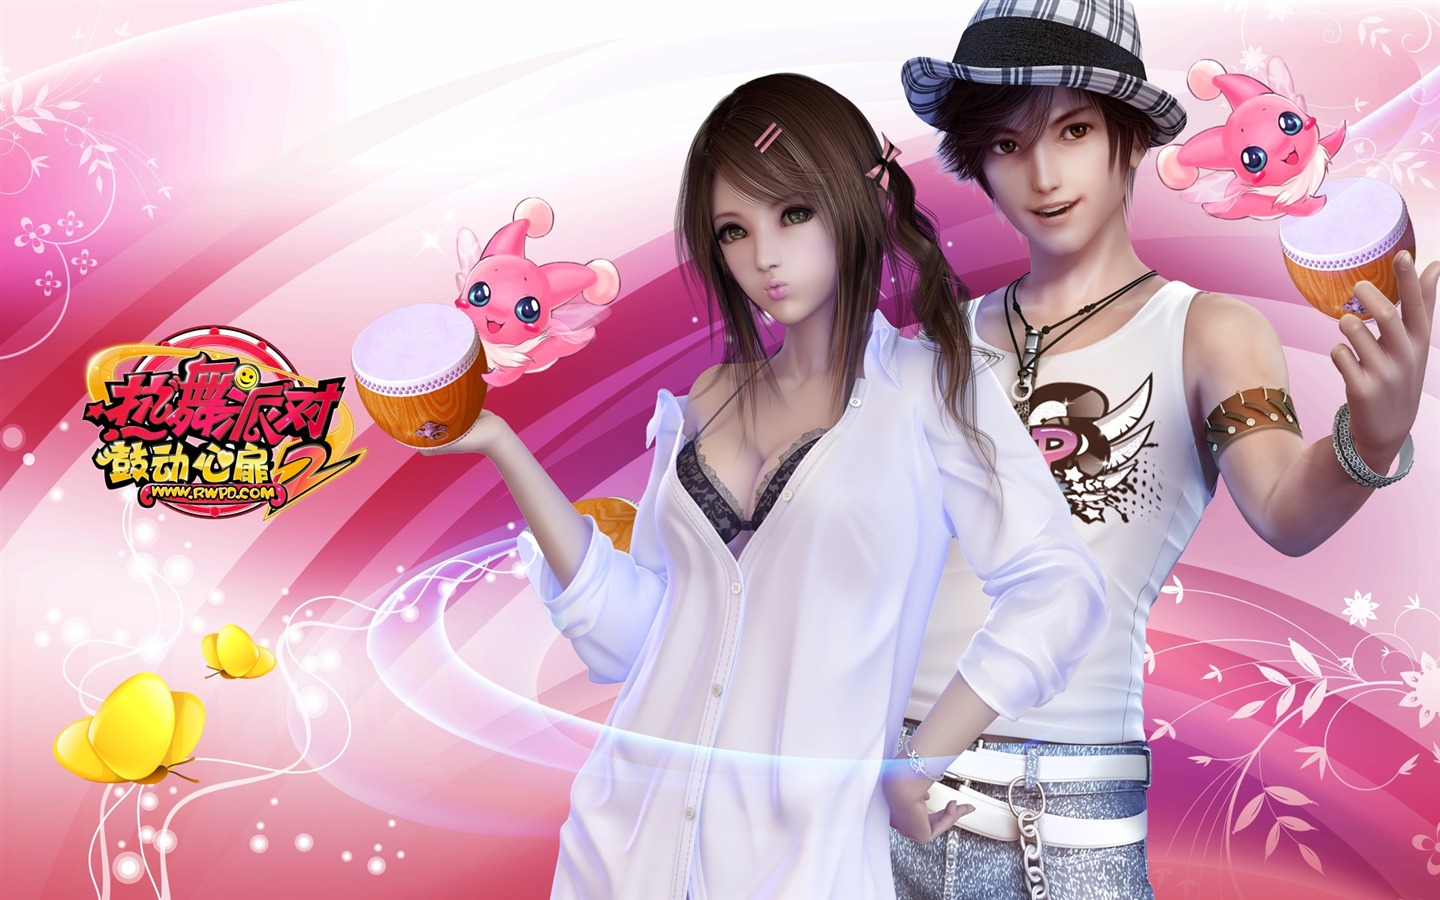 Online game Hot Dance Party II official wallpapers #21 - 1440x900